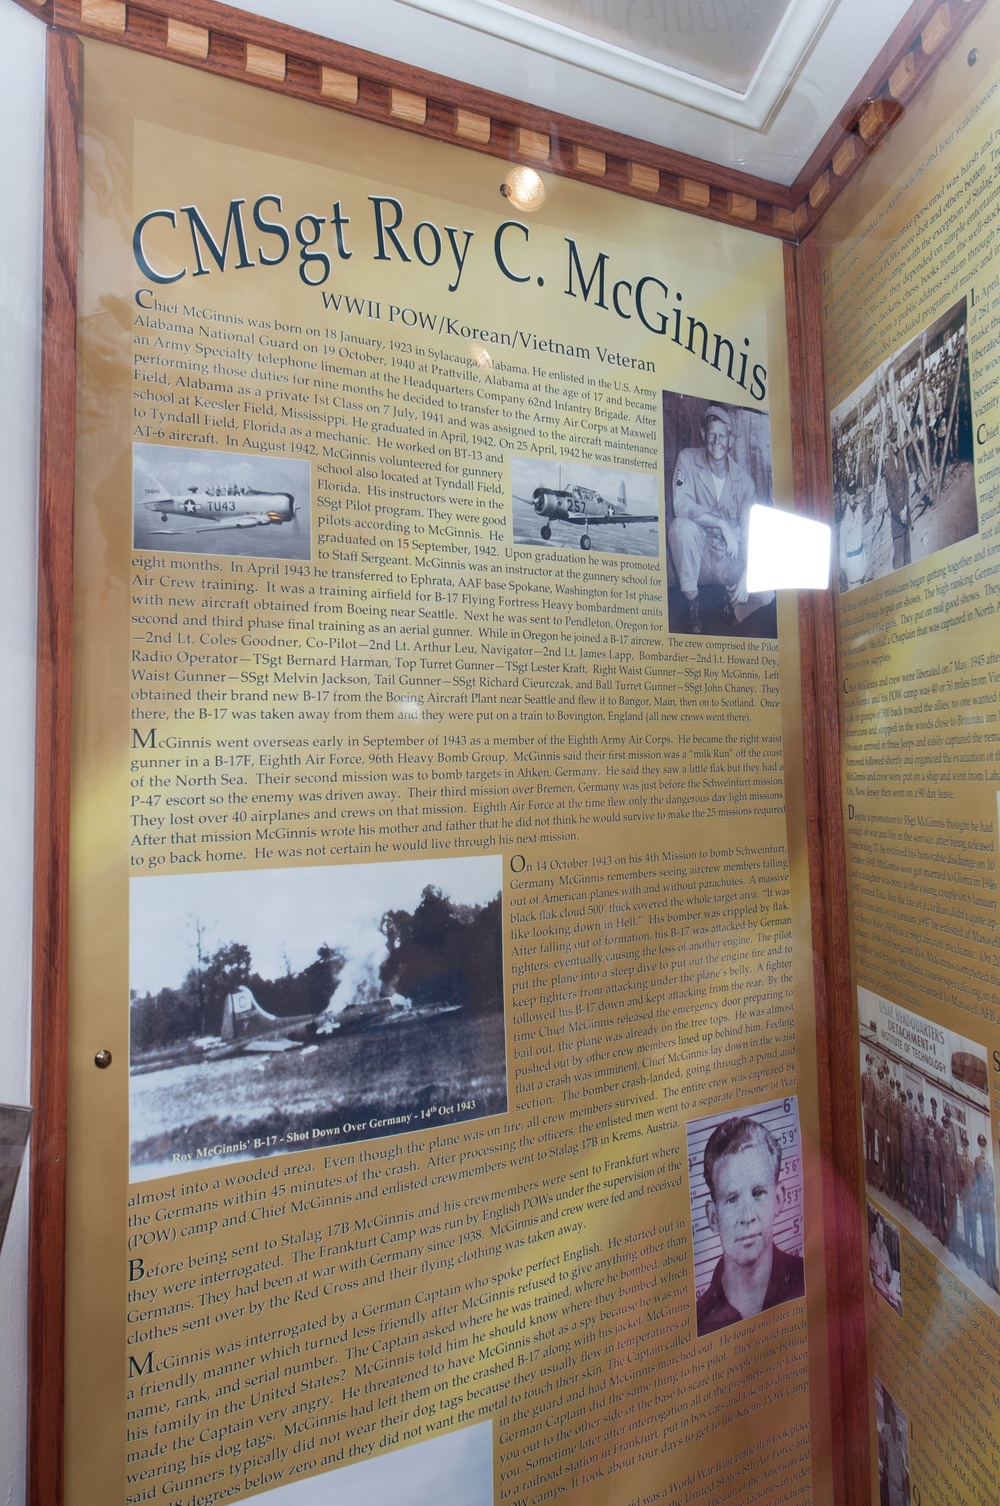 Dedication - Display for Chief Master Sgt. Roy C. McGinnis (WWII - POW)